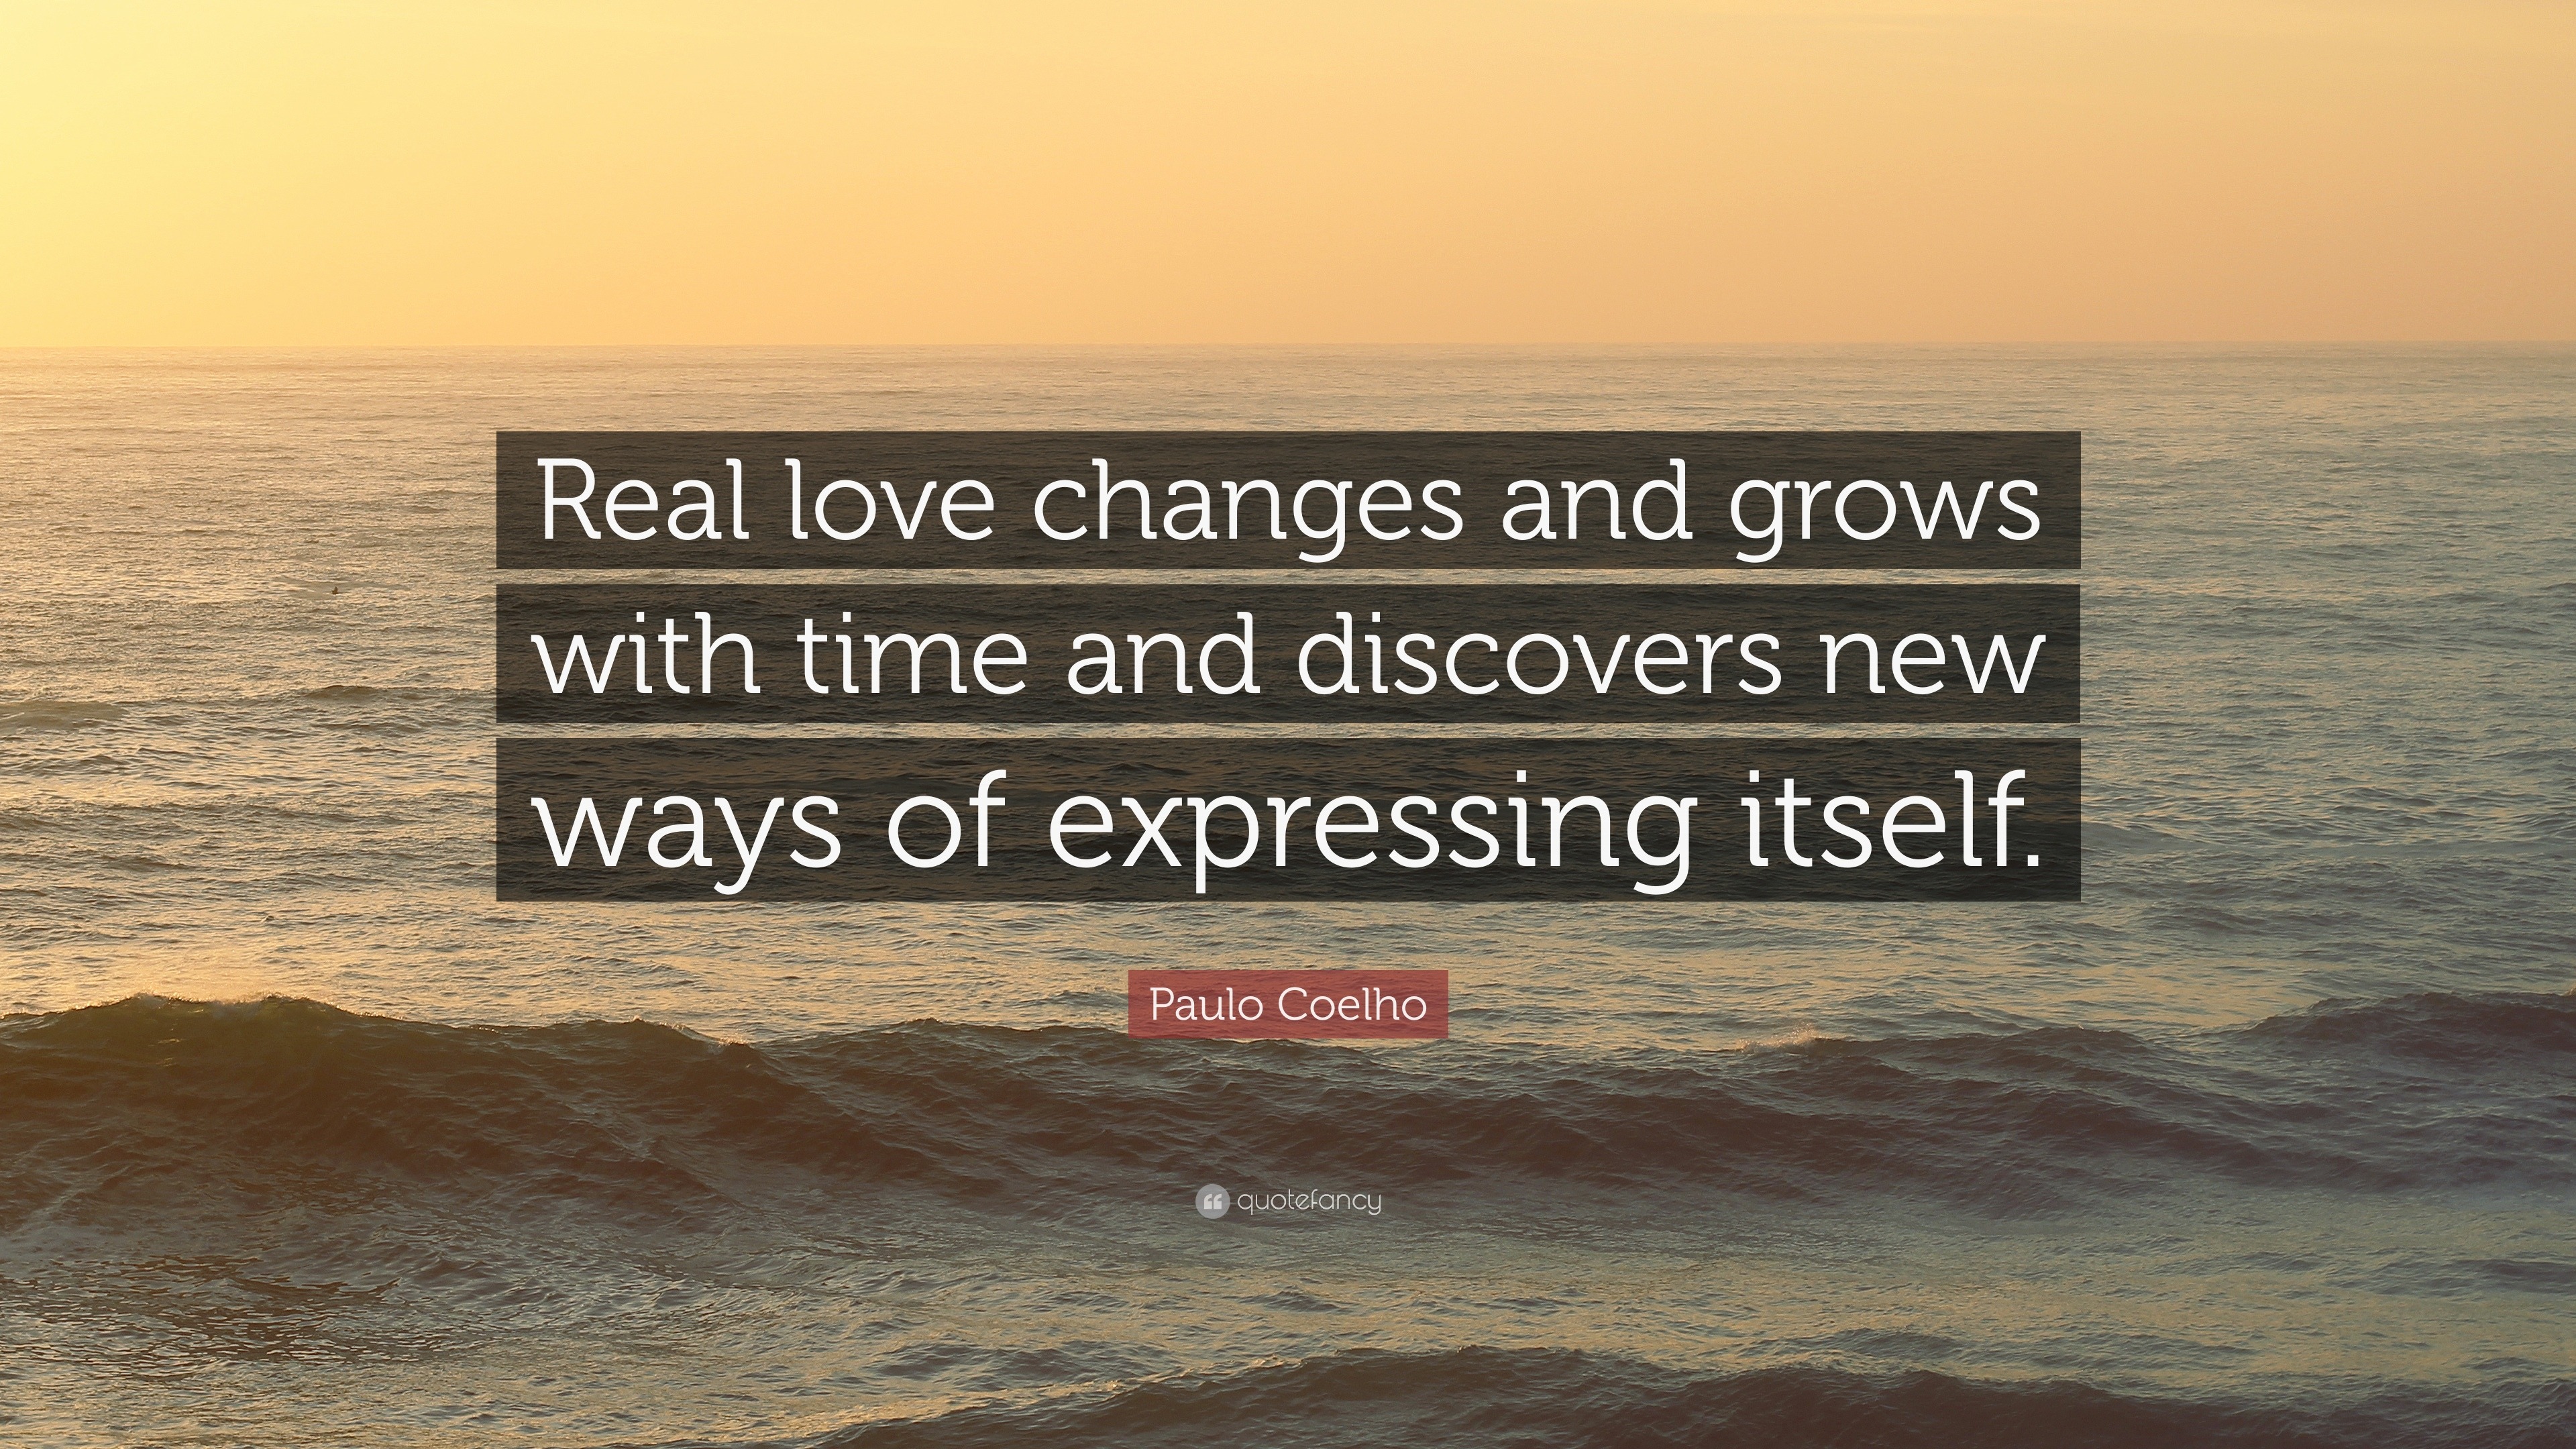 Paulo Coelho Quote “Real love changes and grows with time and discovers new ways